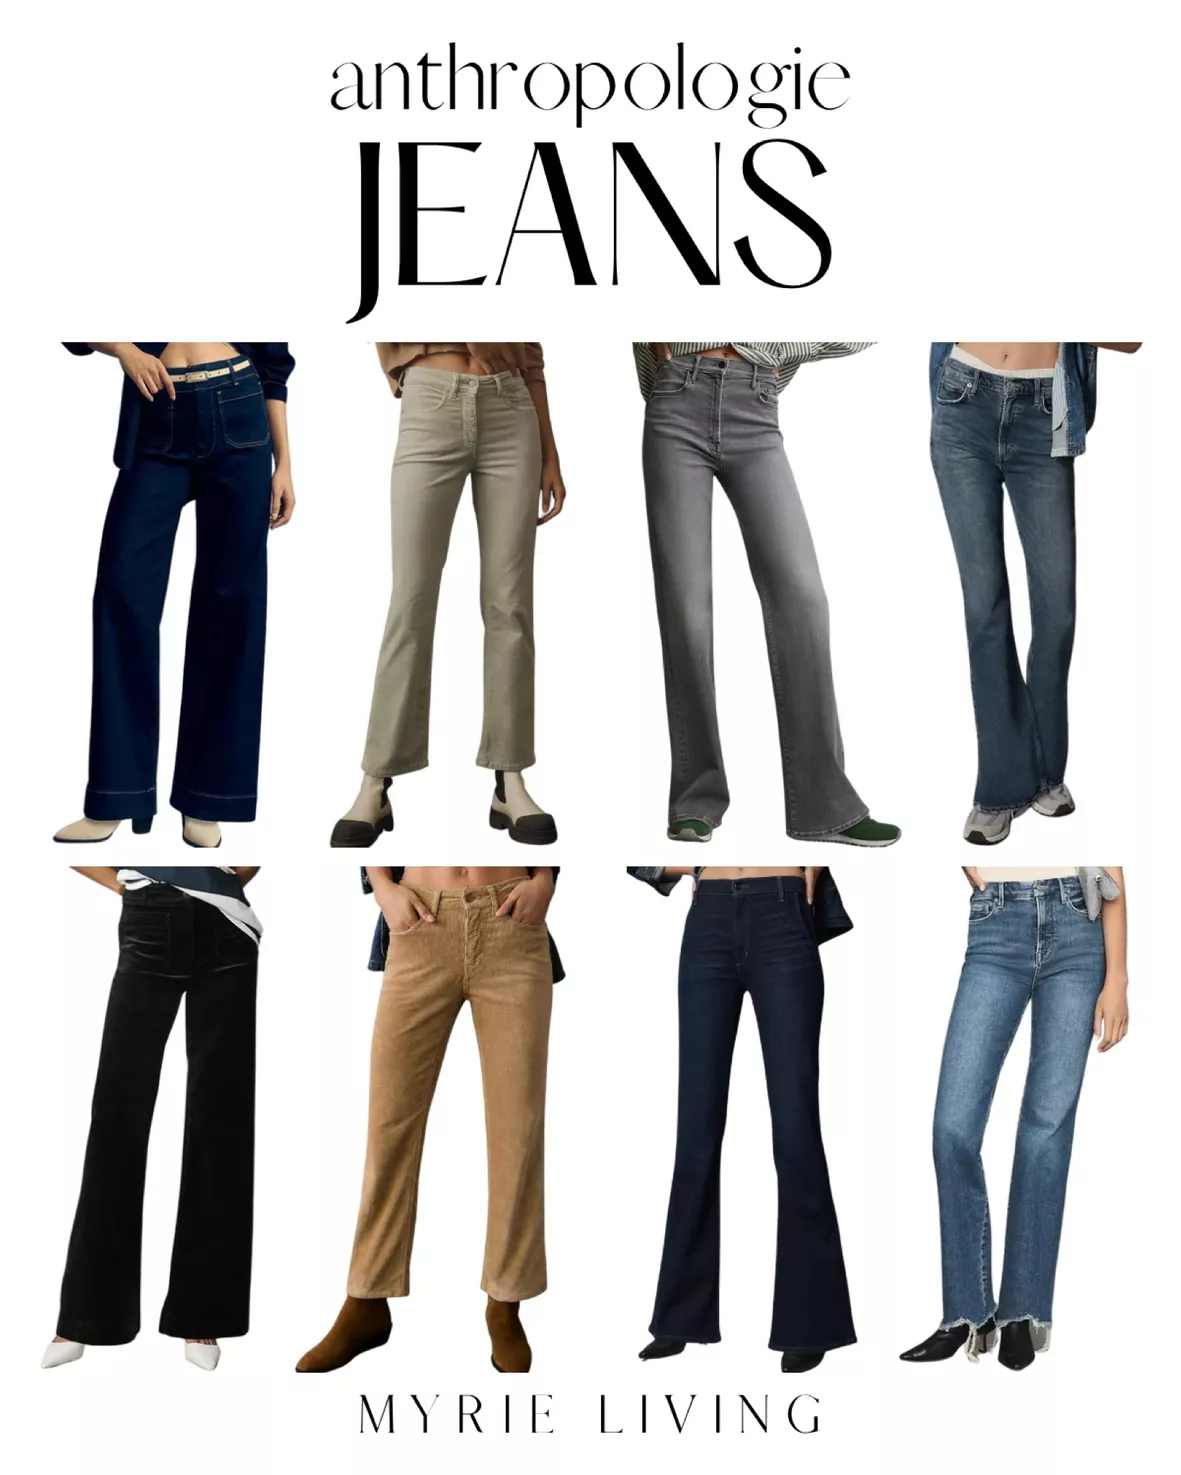 AGOLDE Nico High-Rise Bootcut Jeans curated on LTK